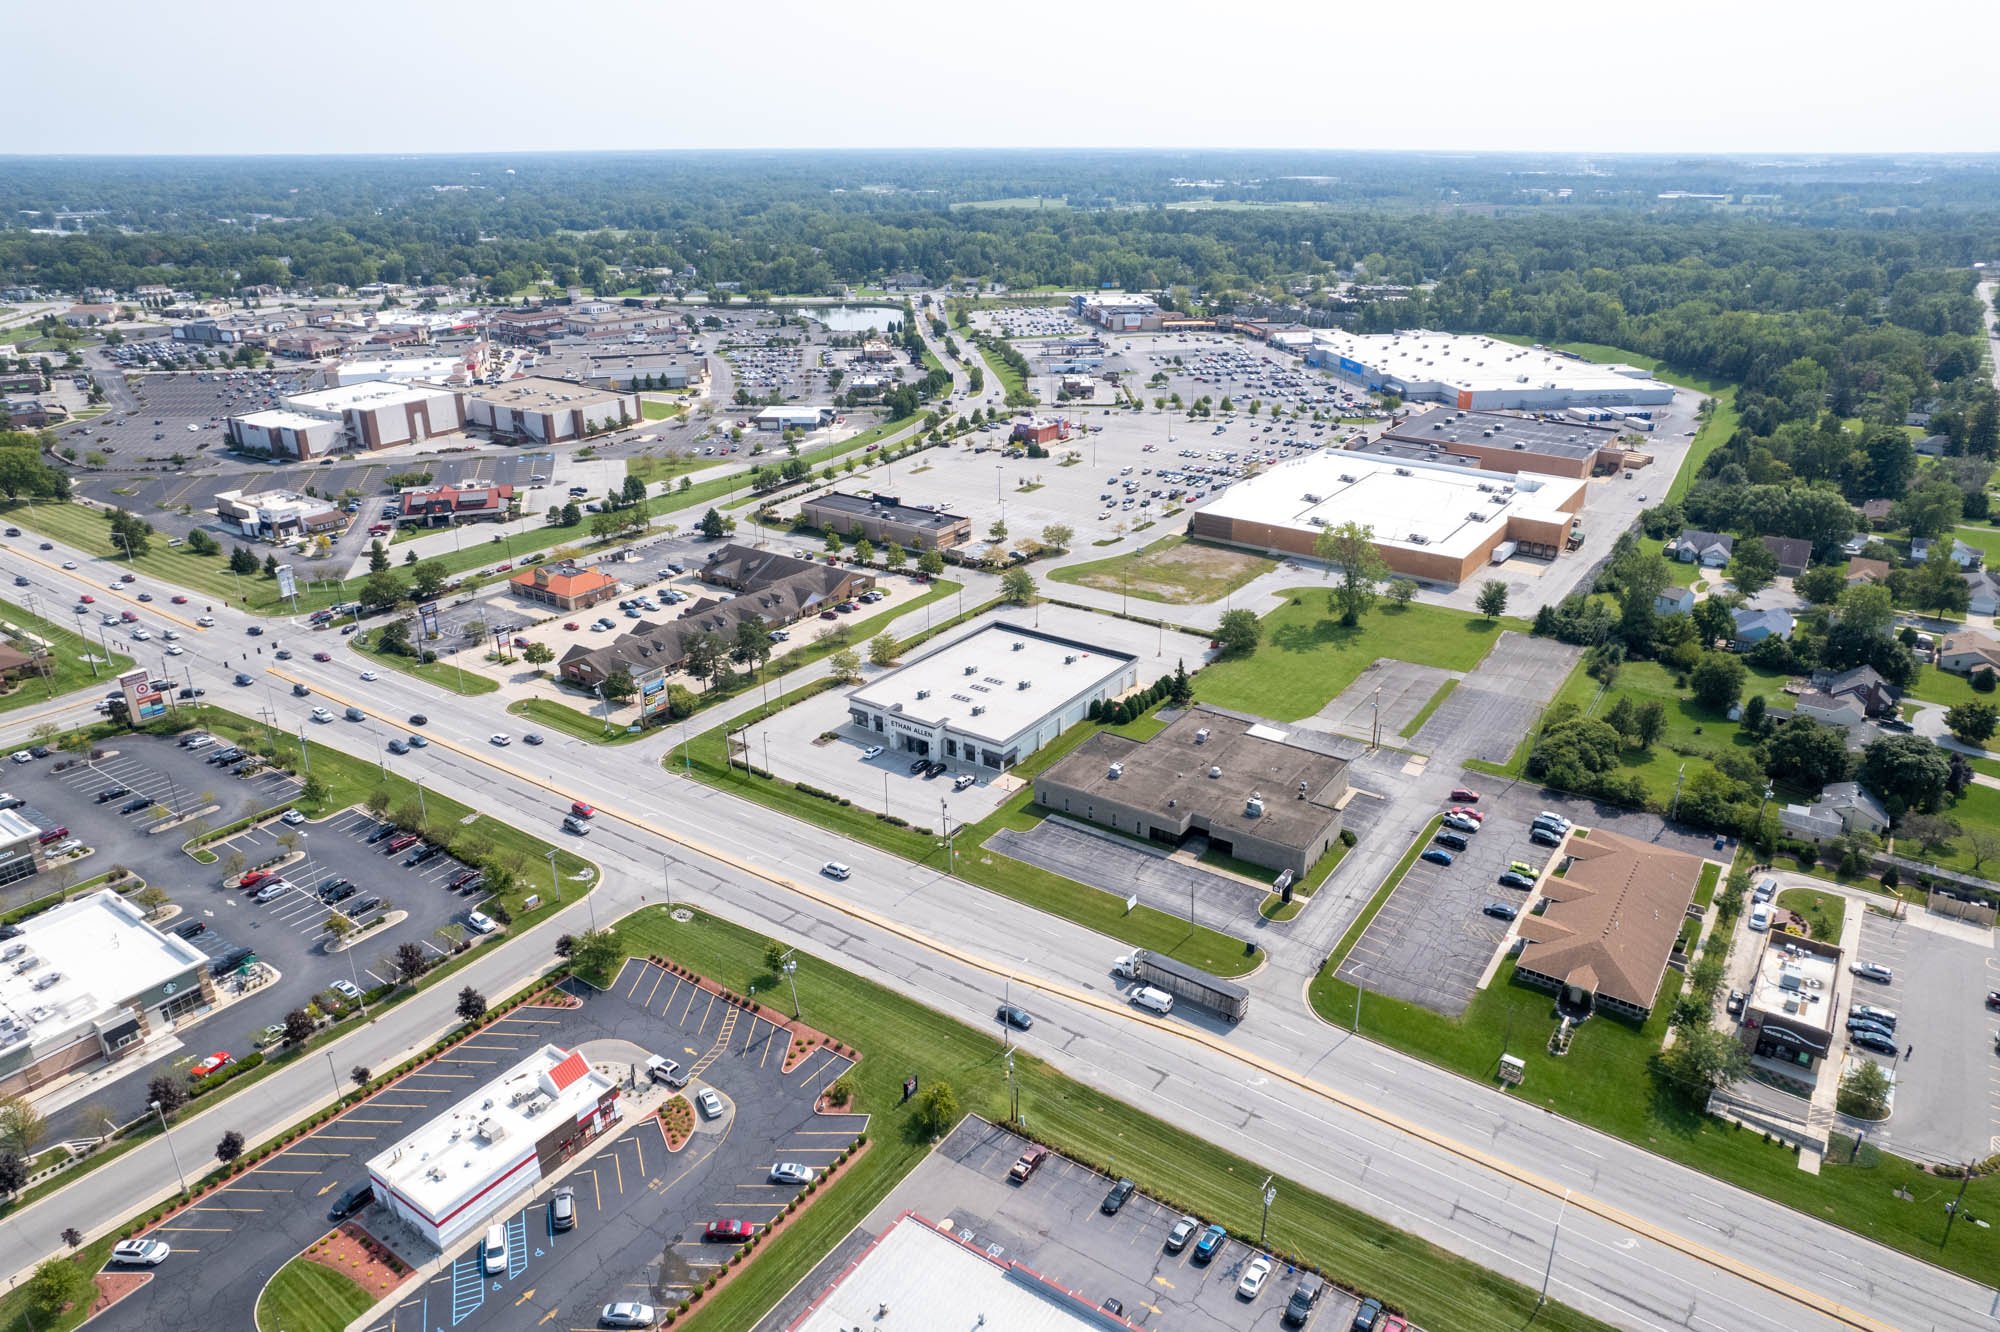 Sturges Property Group - Retail Office Space for lease or sale on Illinois Road in Fort Wayne